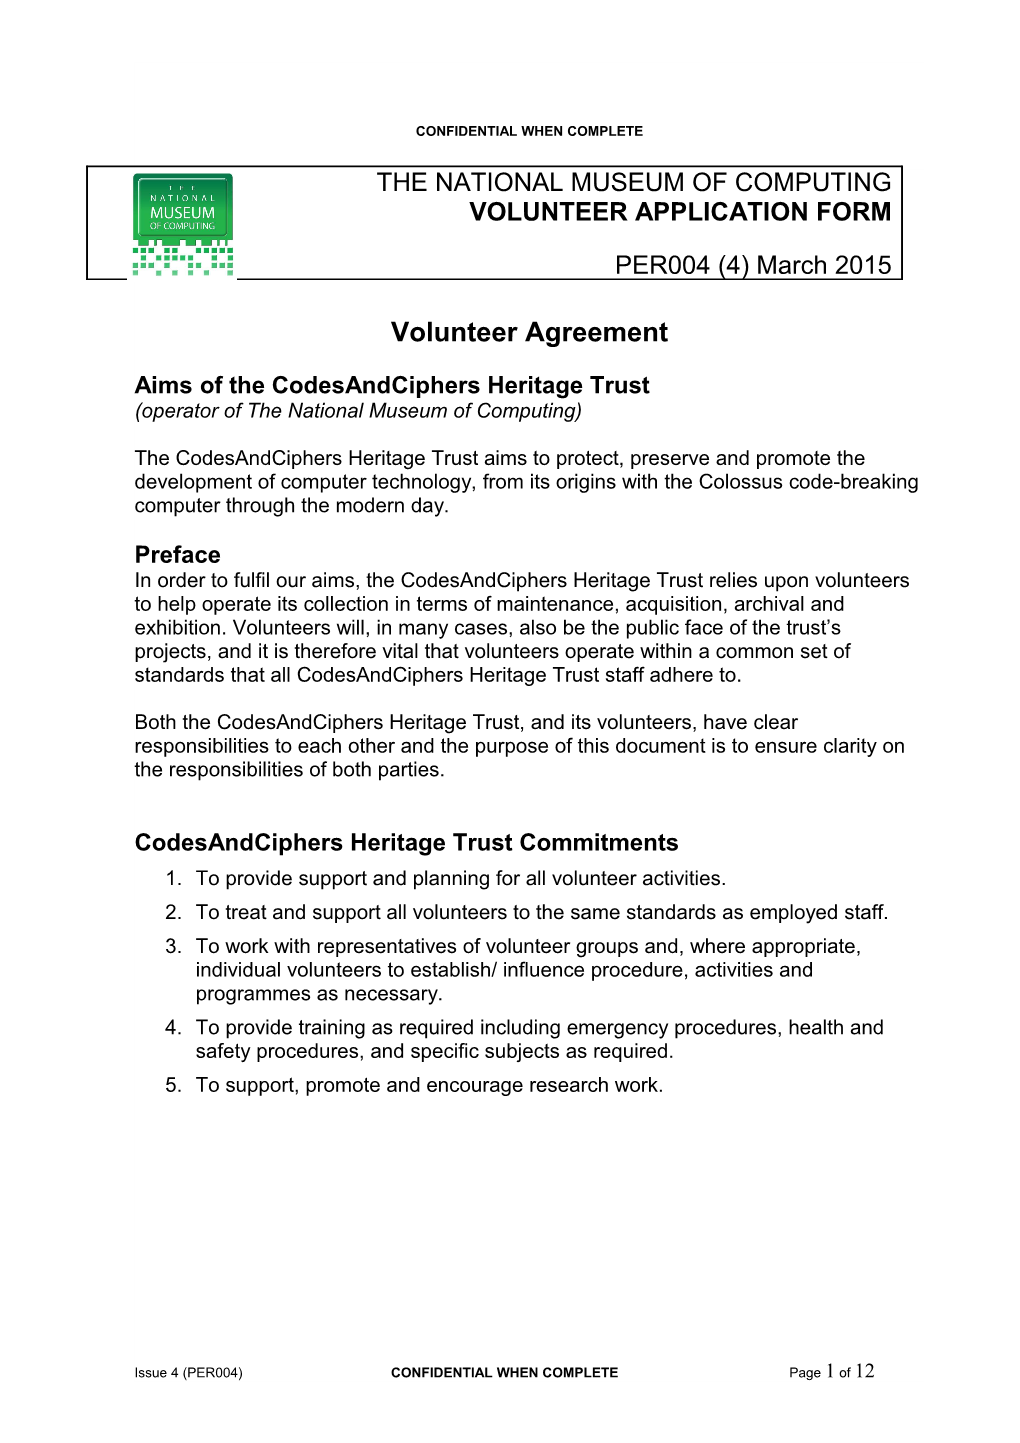 Aims of the Codesandciphers Heritage Trust